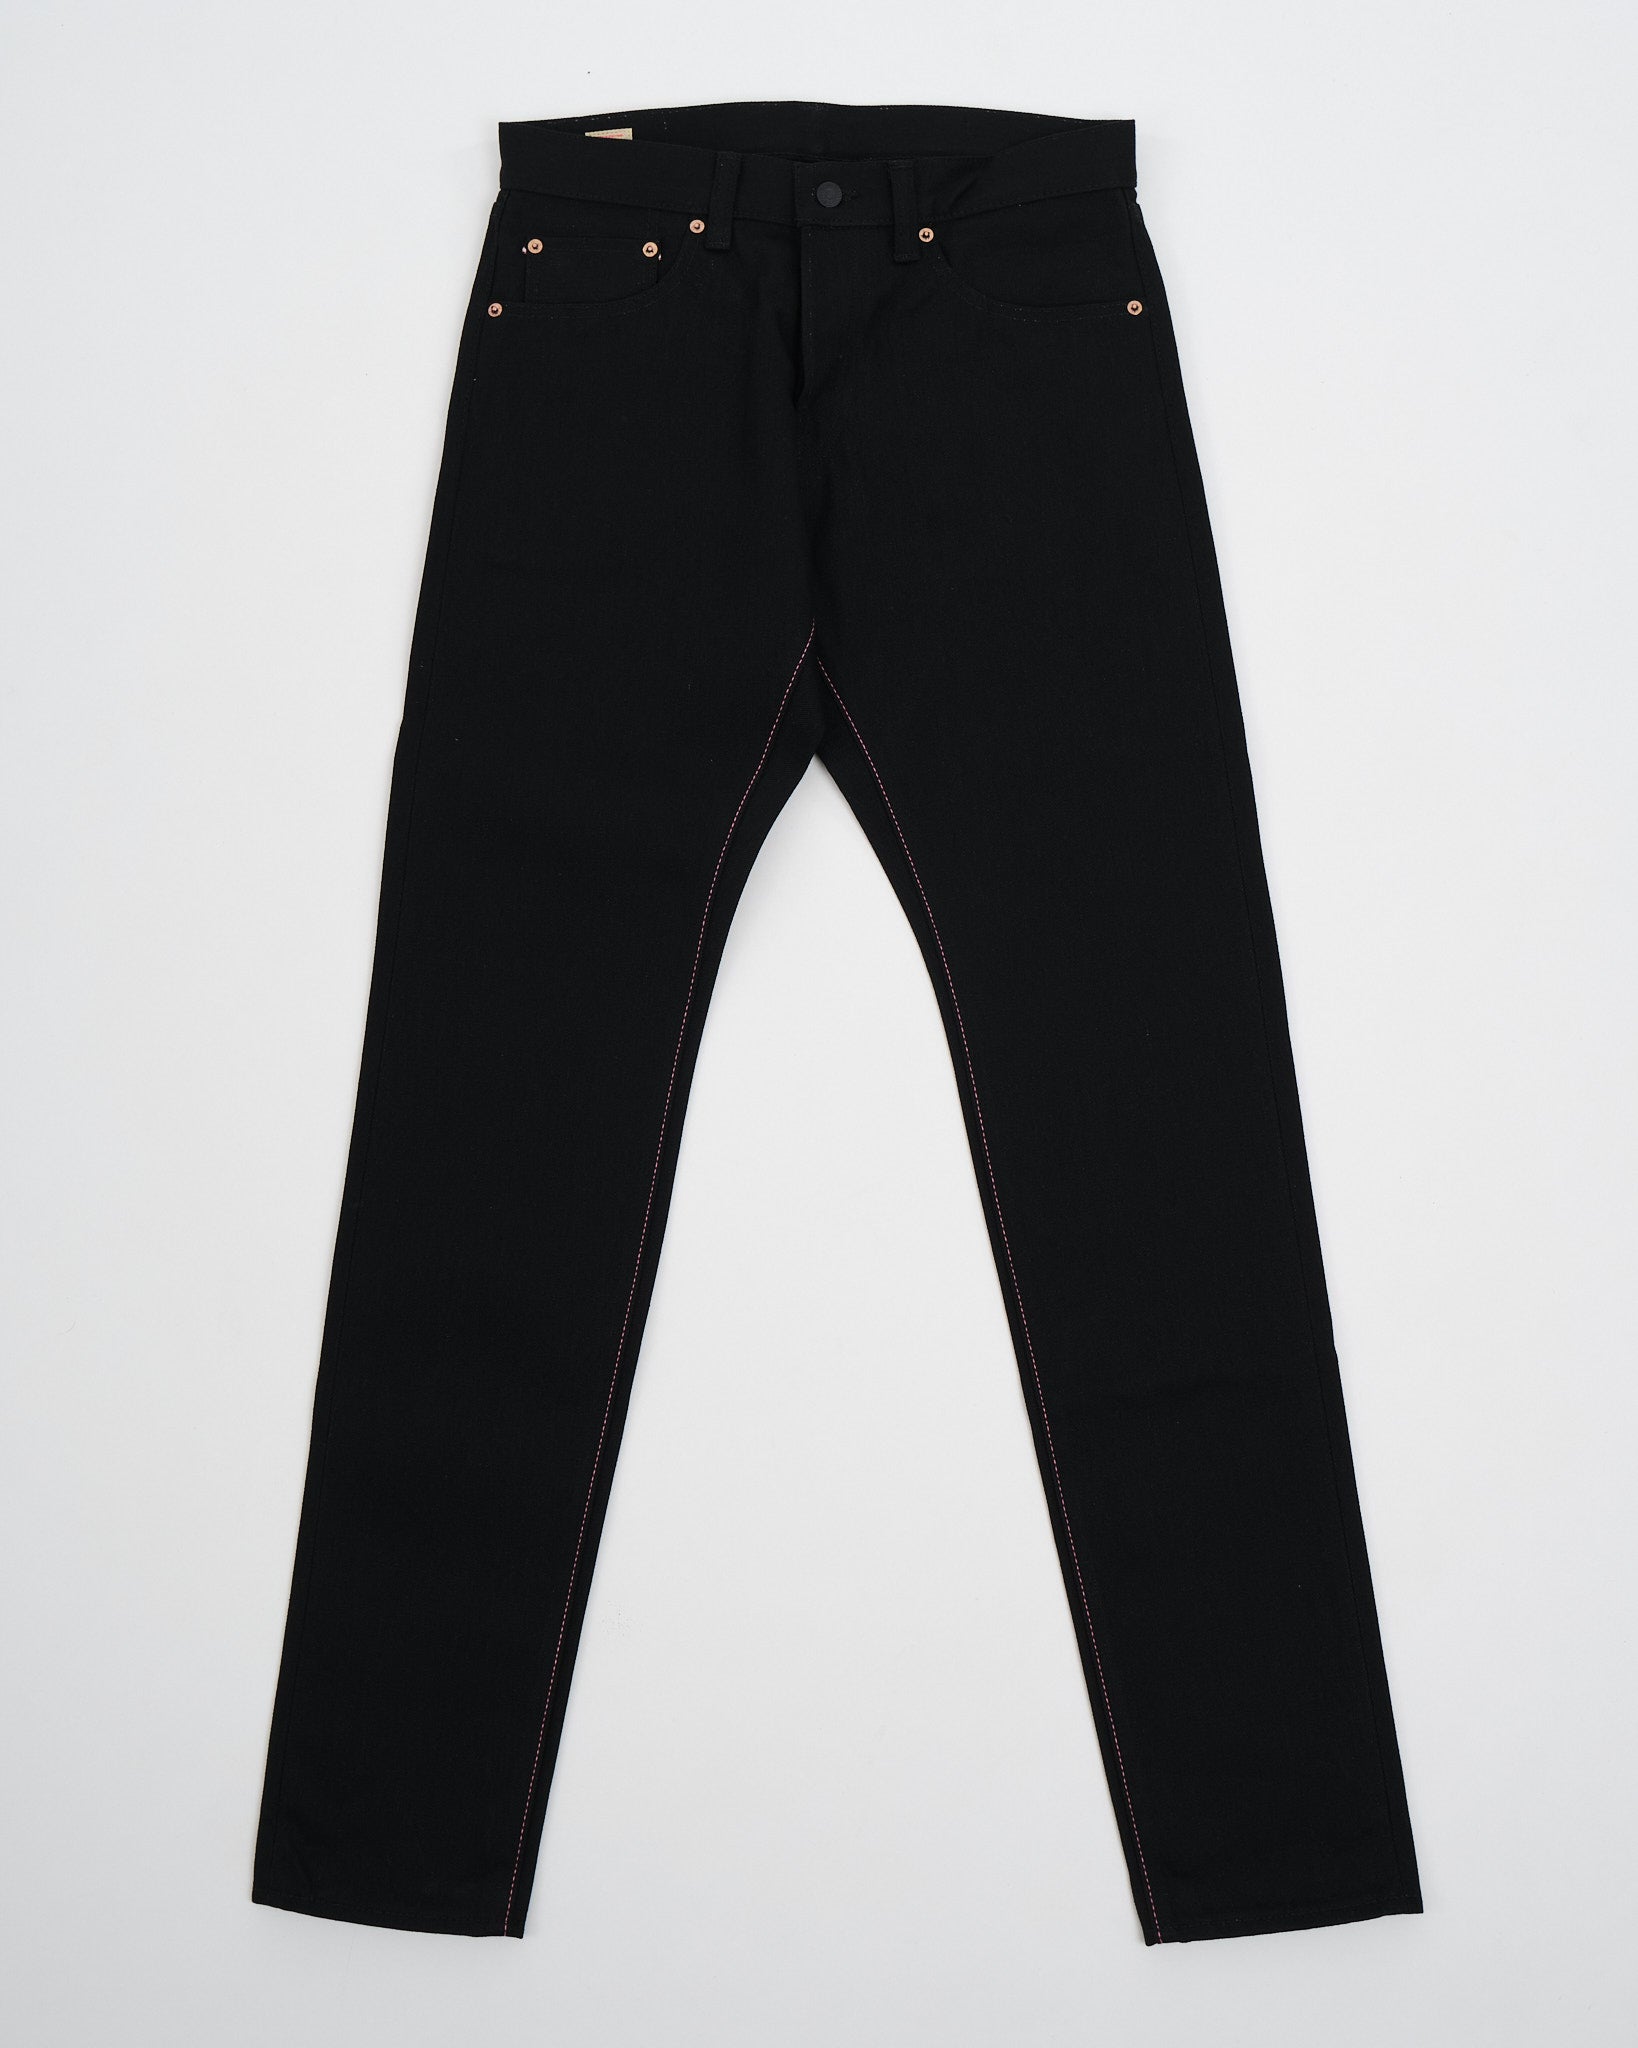 0405-B 15.7 oz Zimbabwe Cotton Black High Tapered Jeans - Meadow